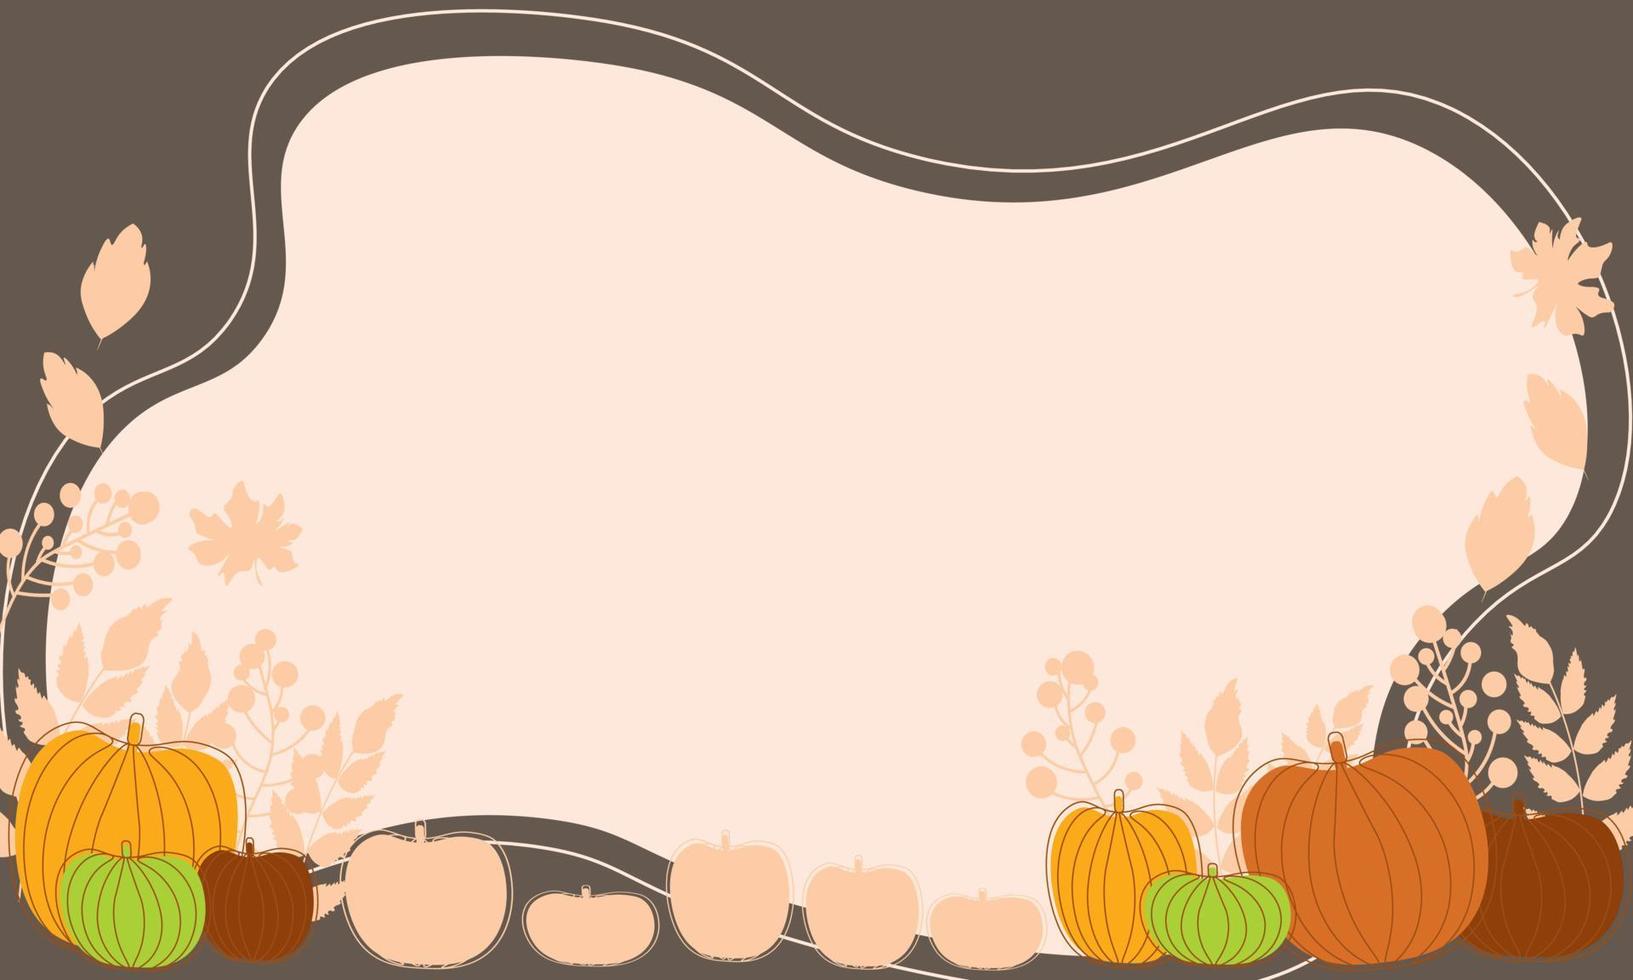 Autumn background vector with pumpkins and leaves